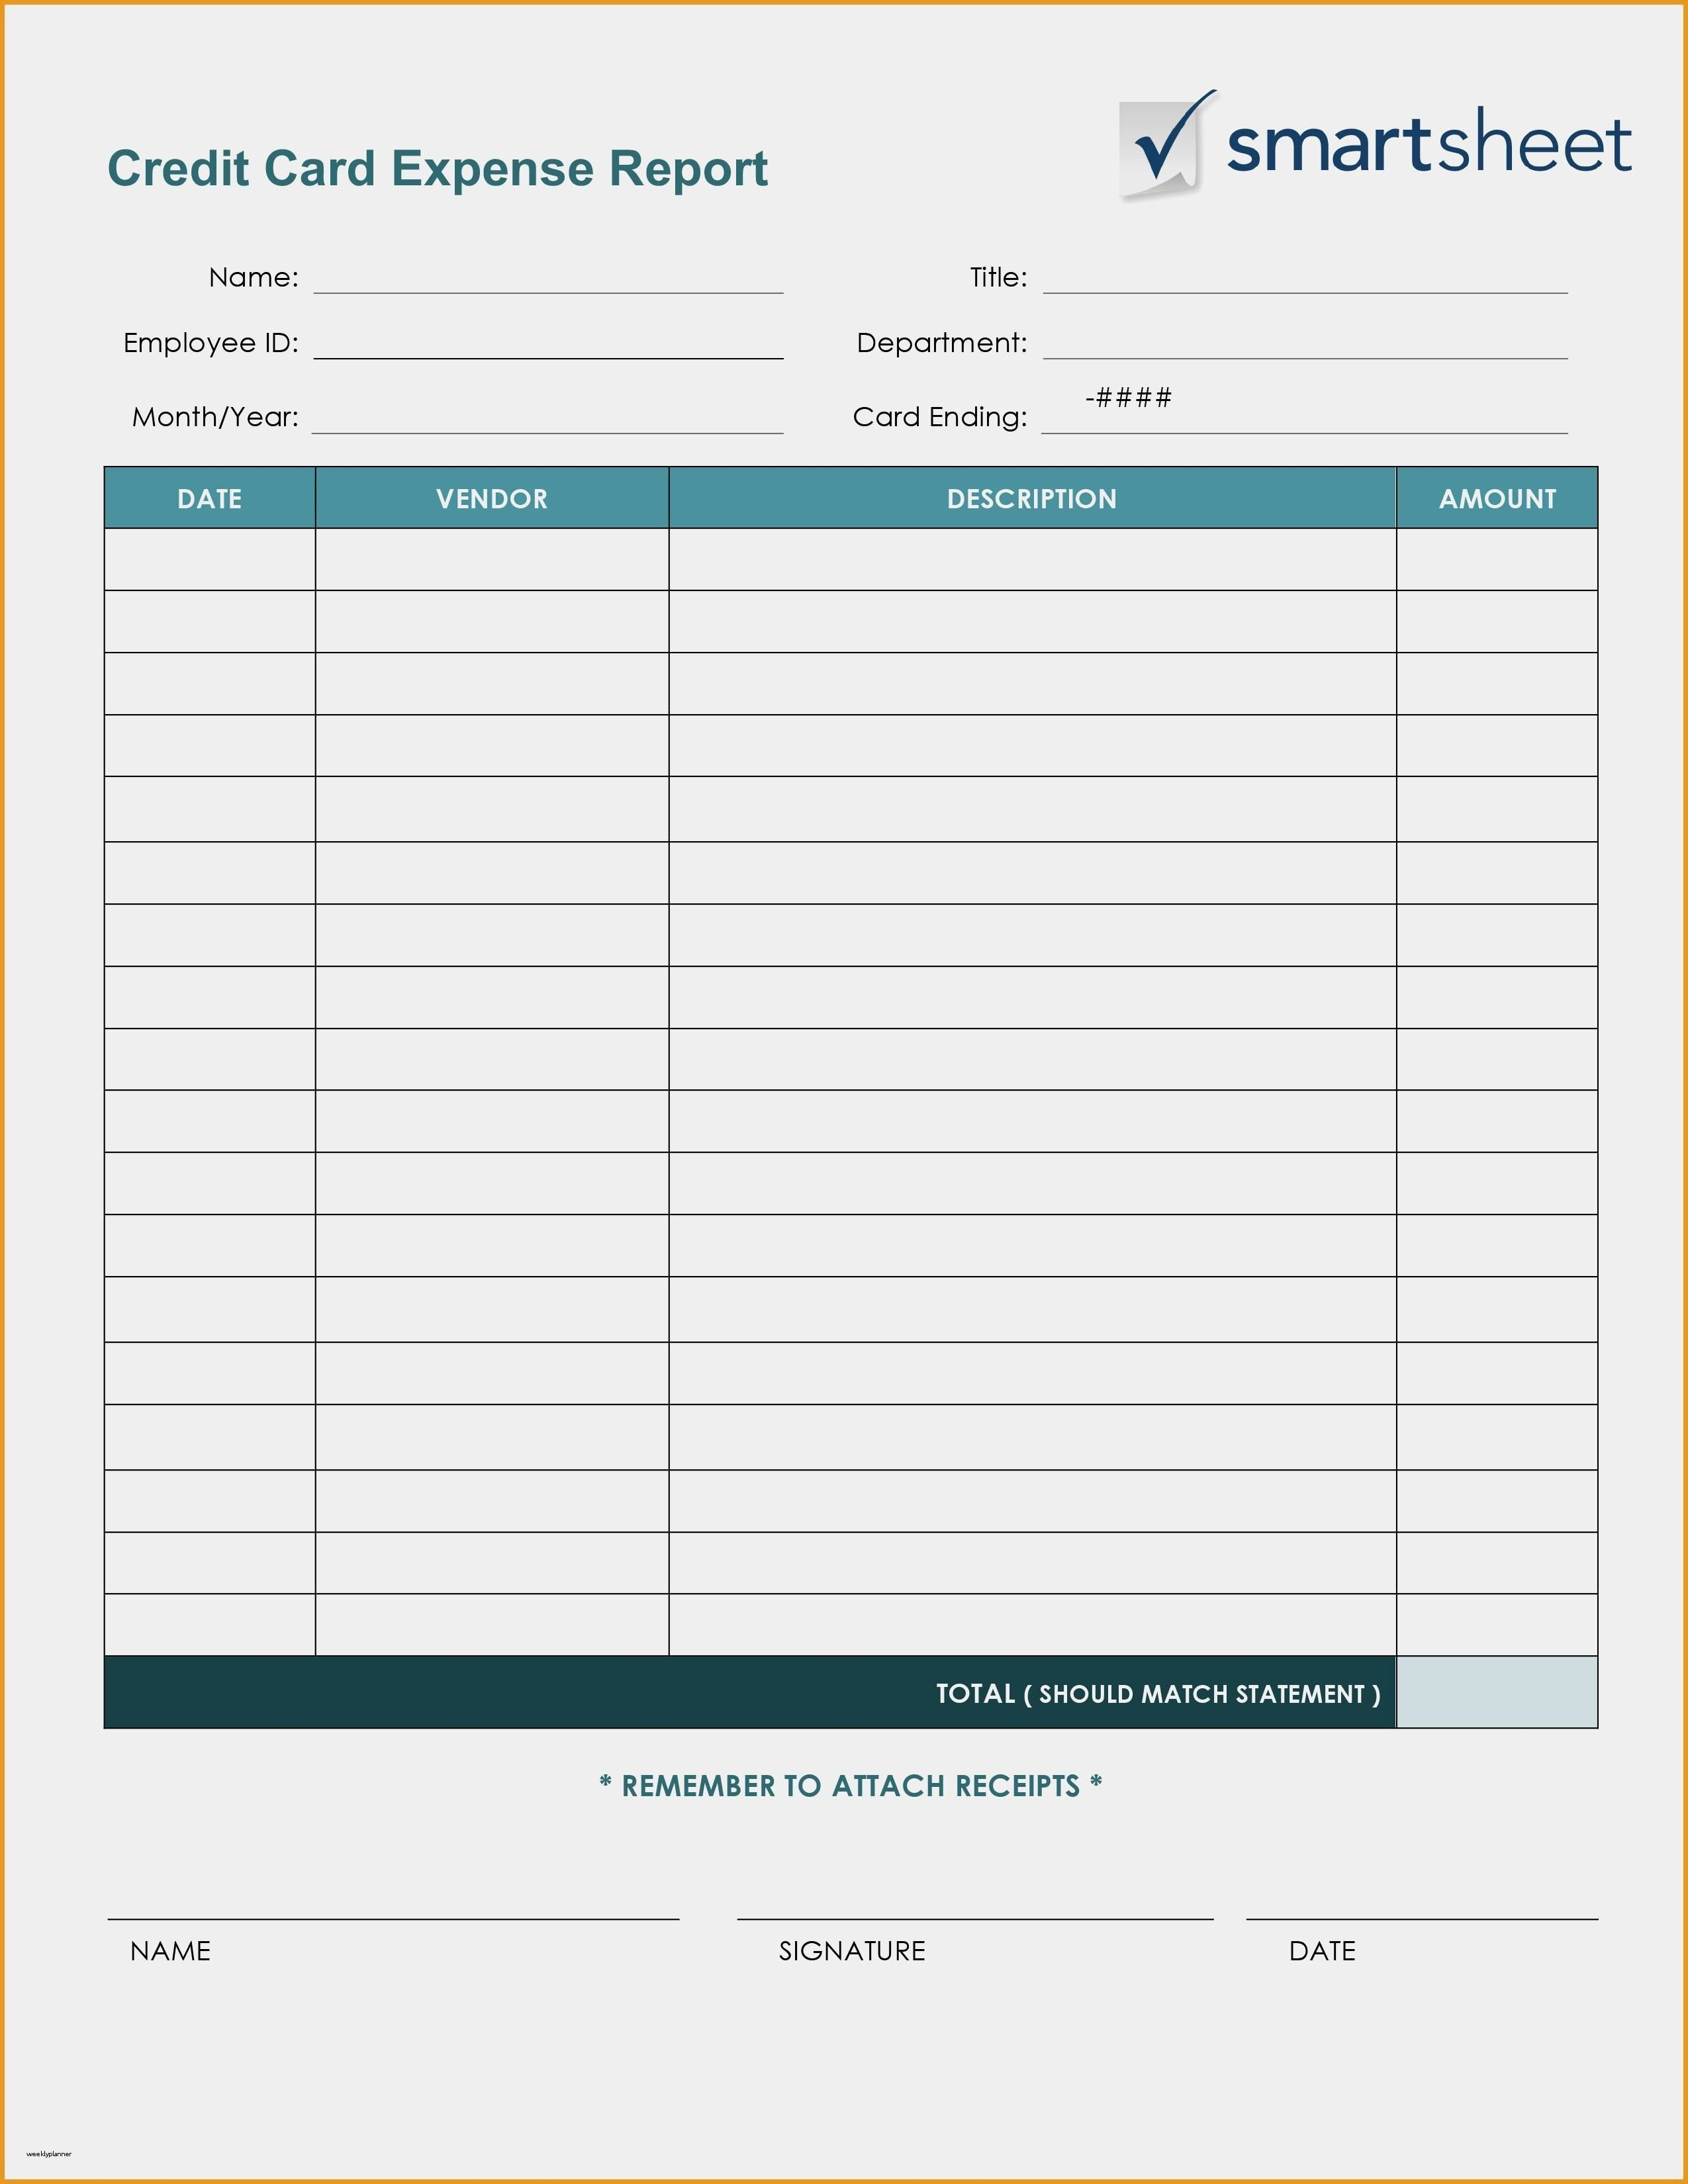 Business Valuation Report Template Save Business Valuation Report To Business Valuation Report Template Worksheet